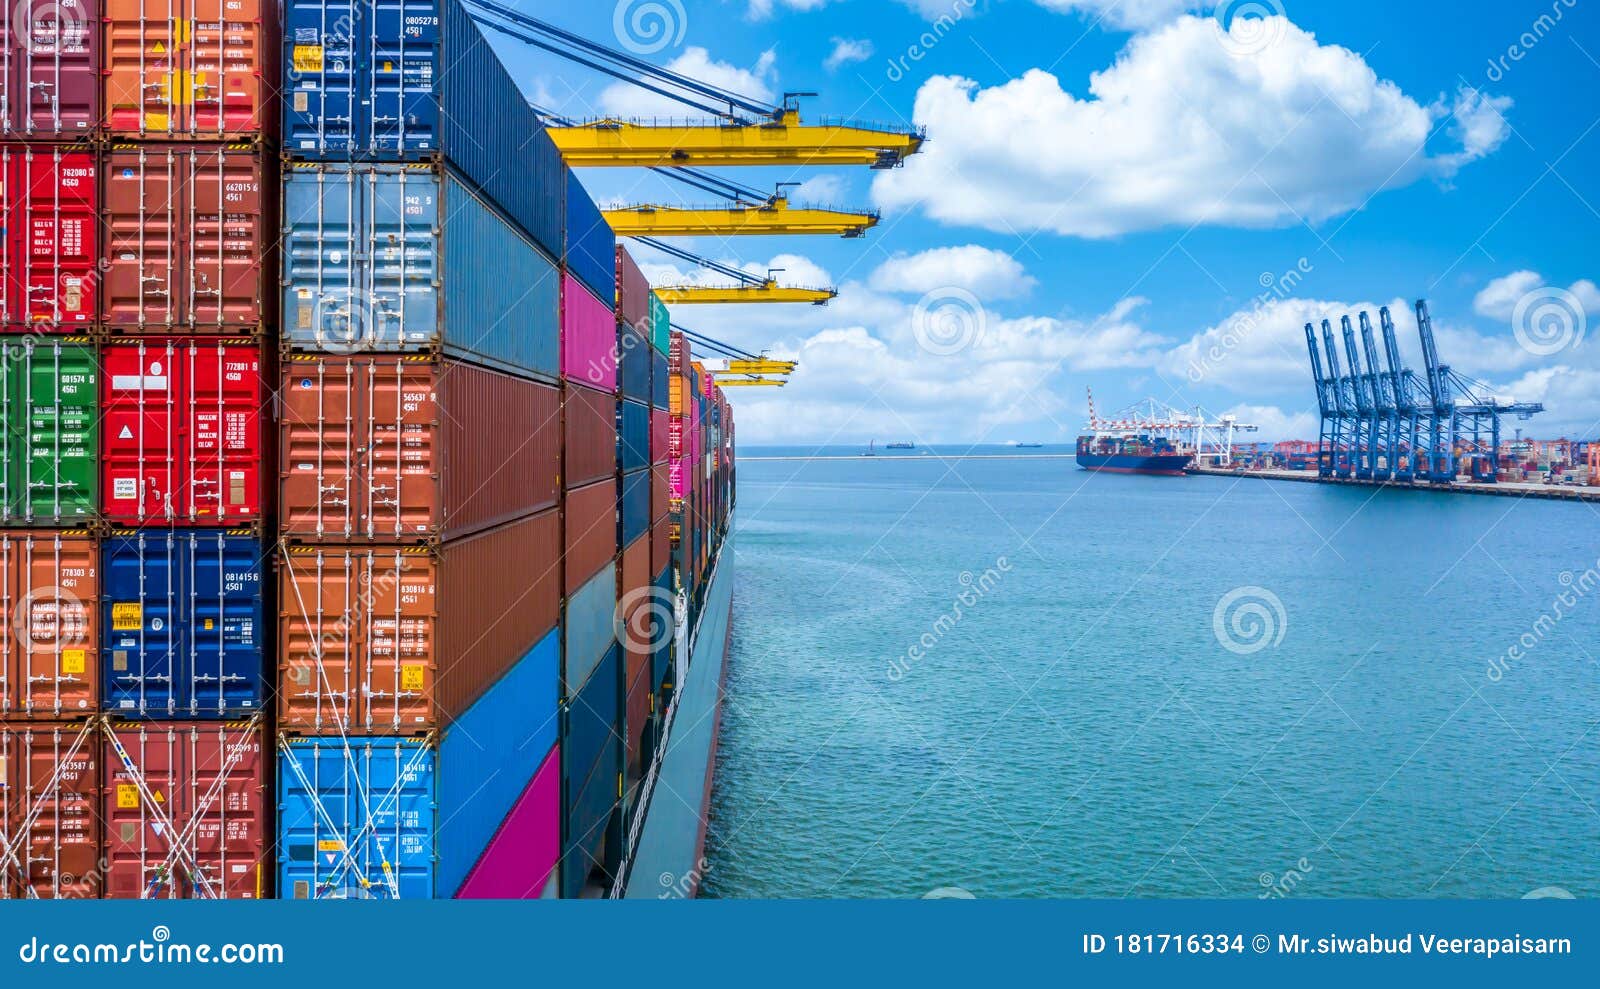 container ship unloading in deep sea port, global business logistic import export freight shipping transportation oversea